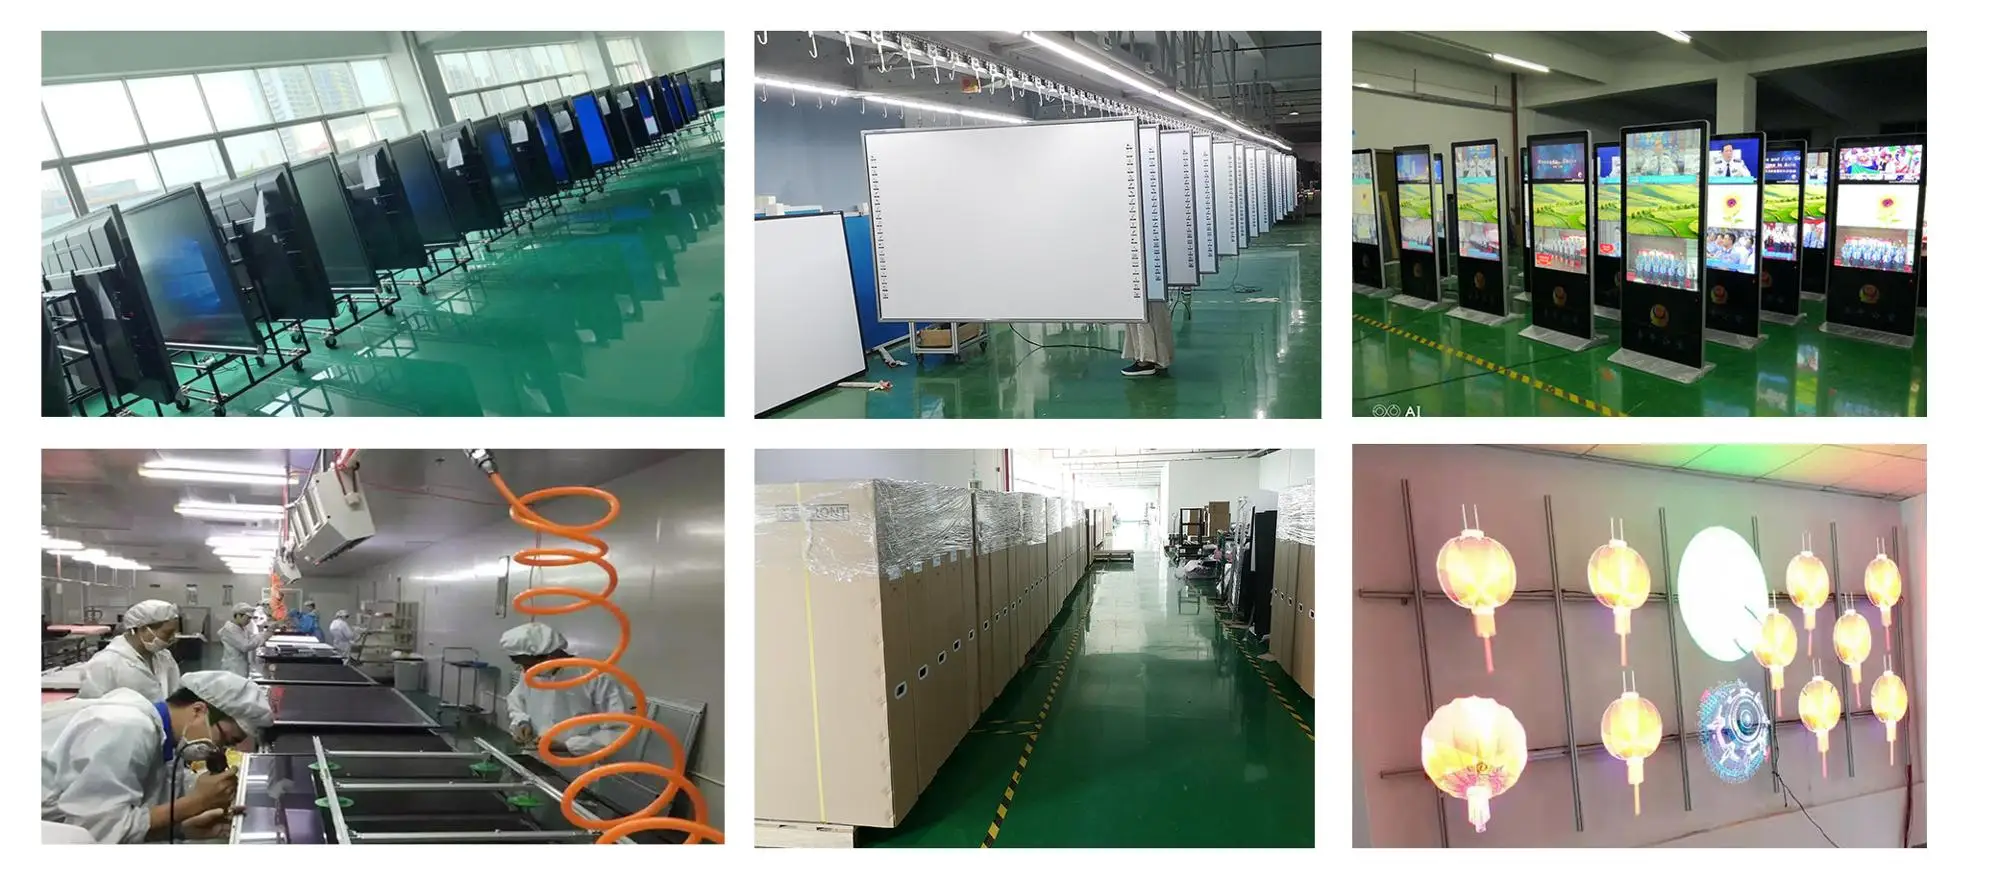 Factory Hot 49 55 Inch Floor Standing 4K Display  Advertising Tv Android Kiosk Lcd  Led Display Digital Signage Solutions